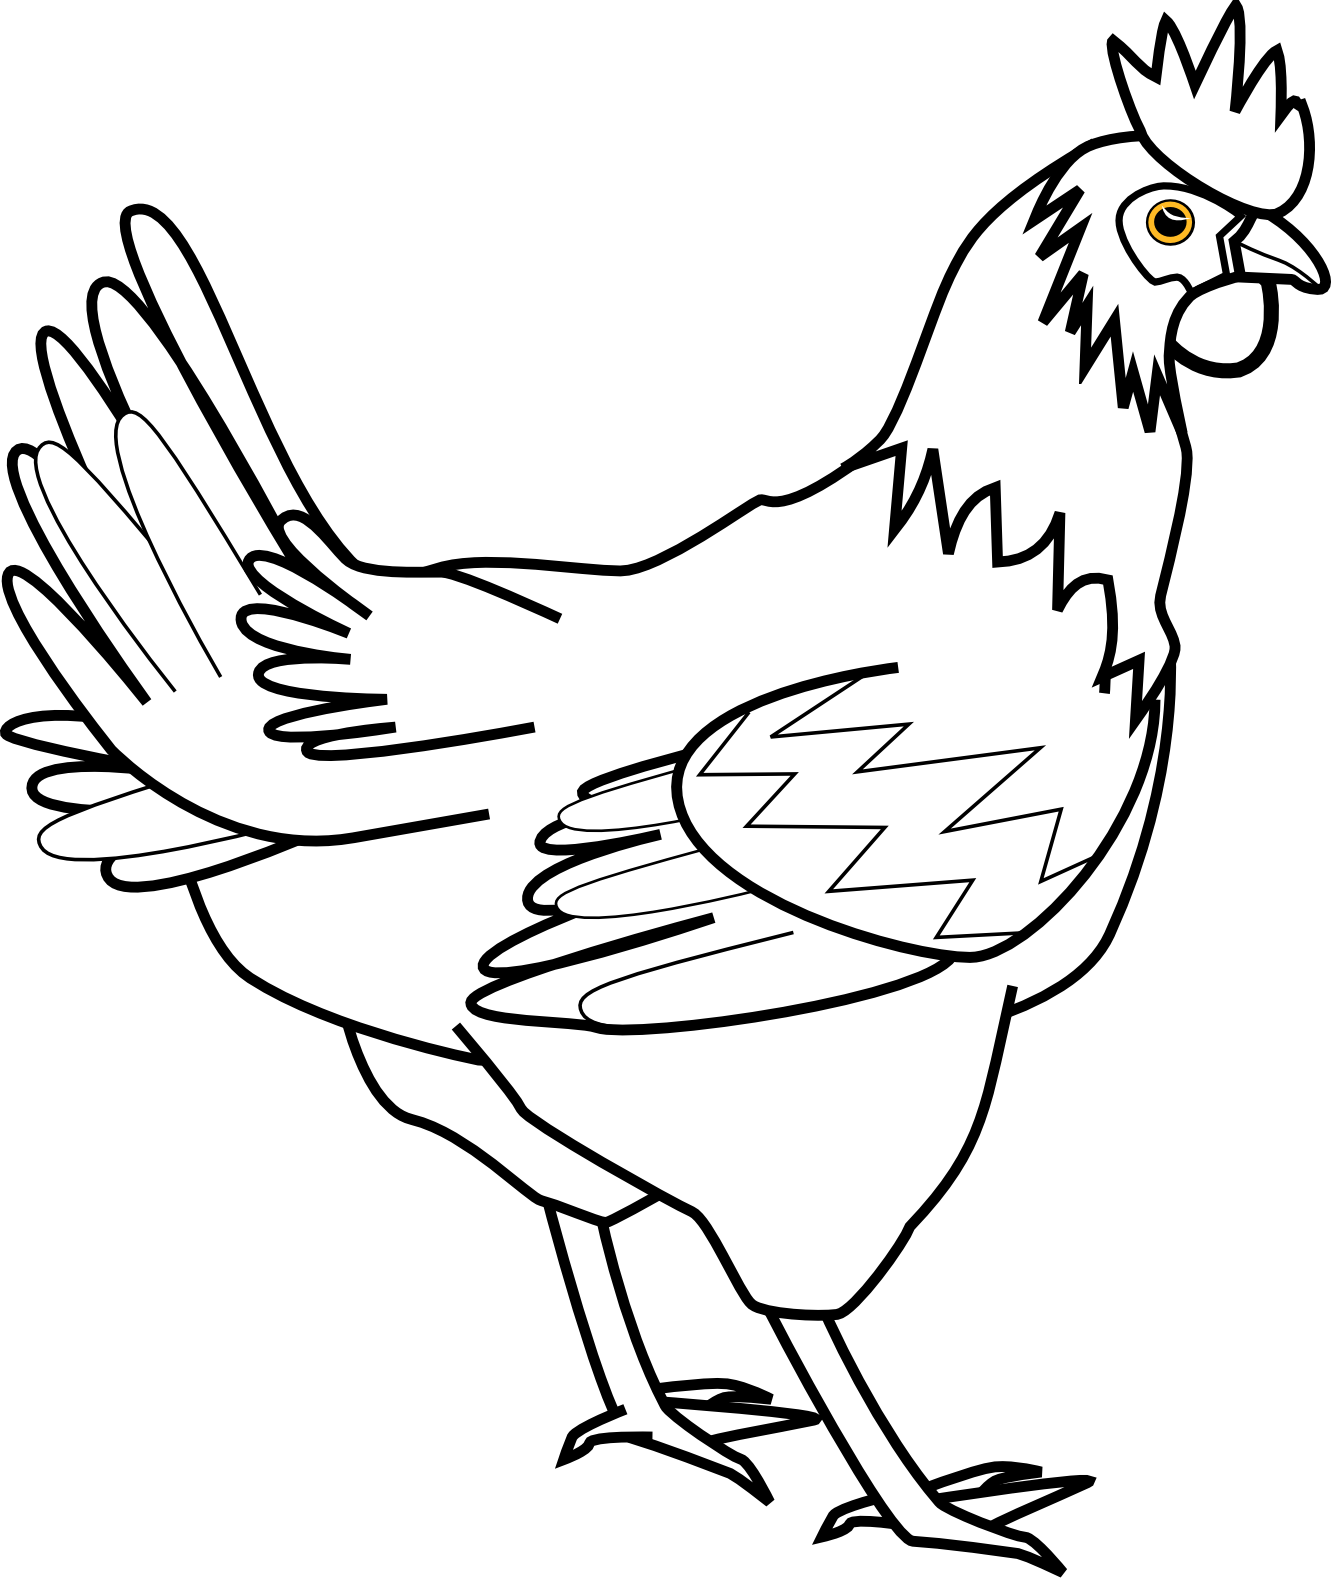 chicken black white line art coloring book colouring svg id 35085 ...